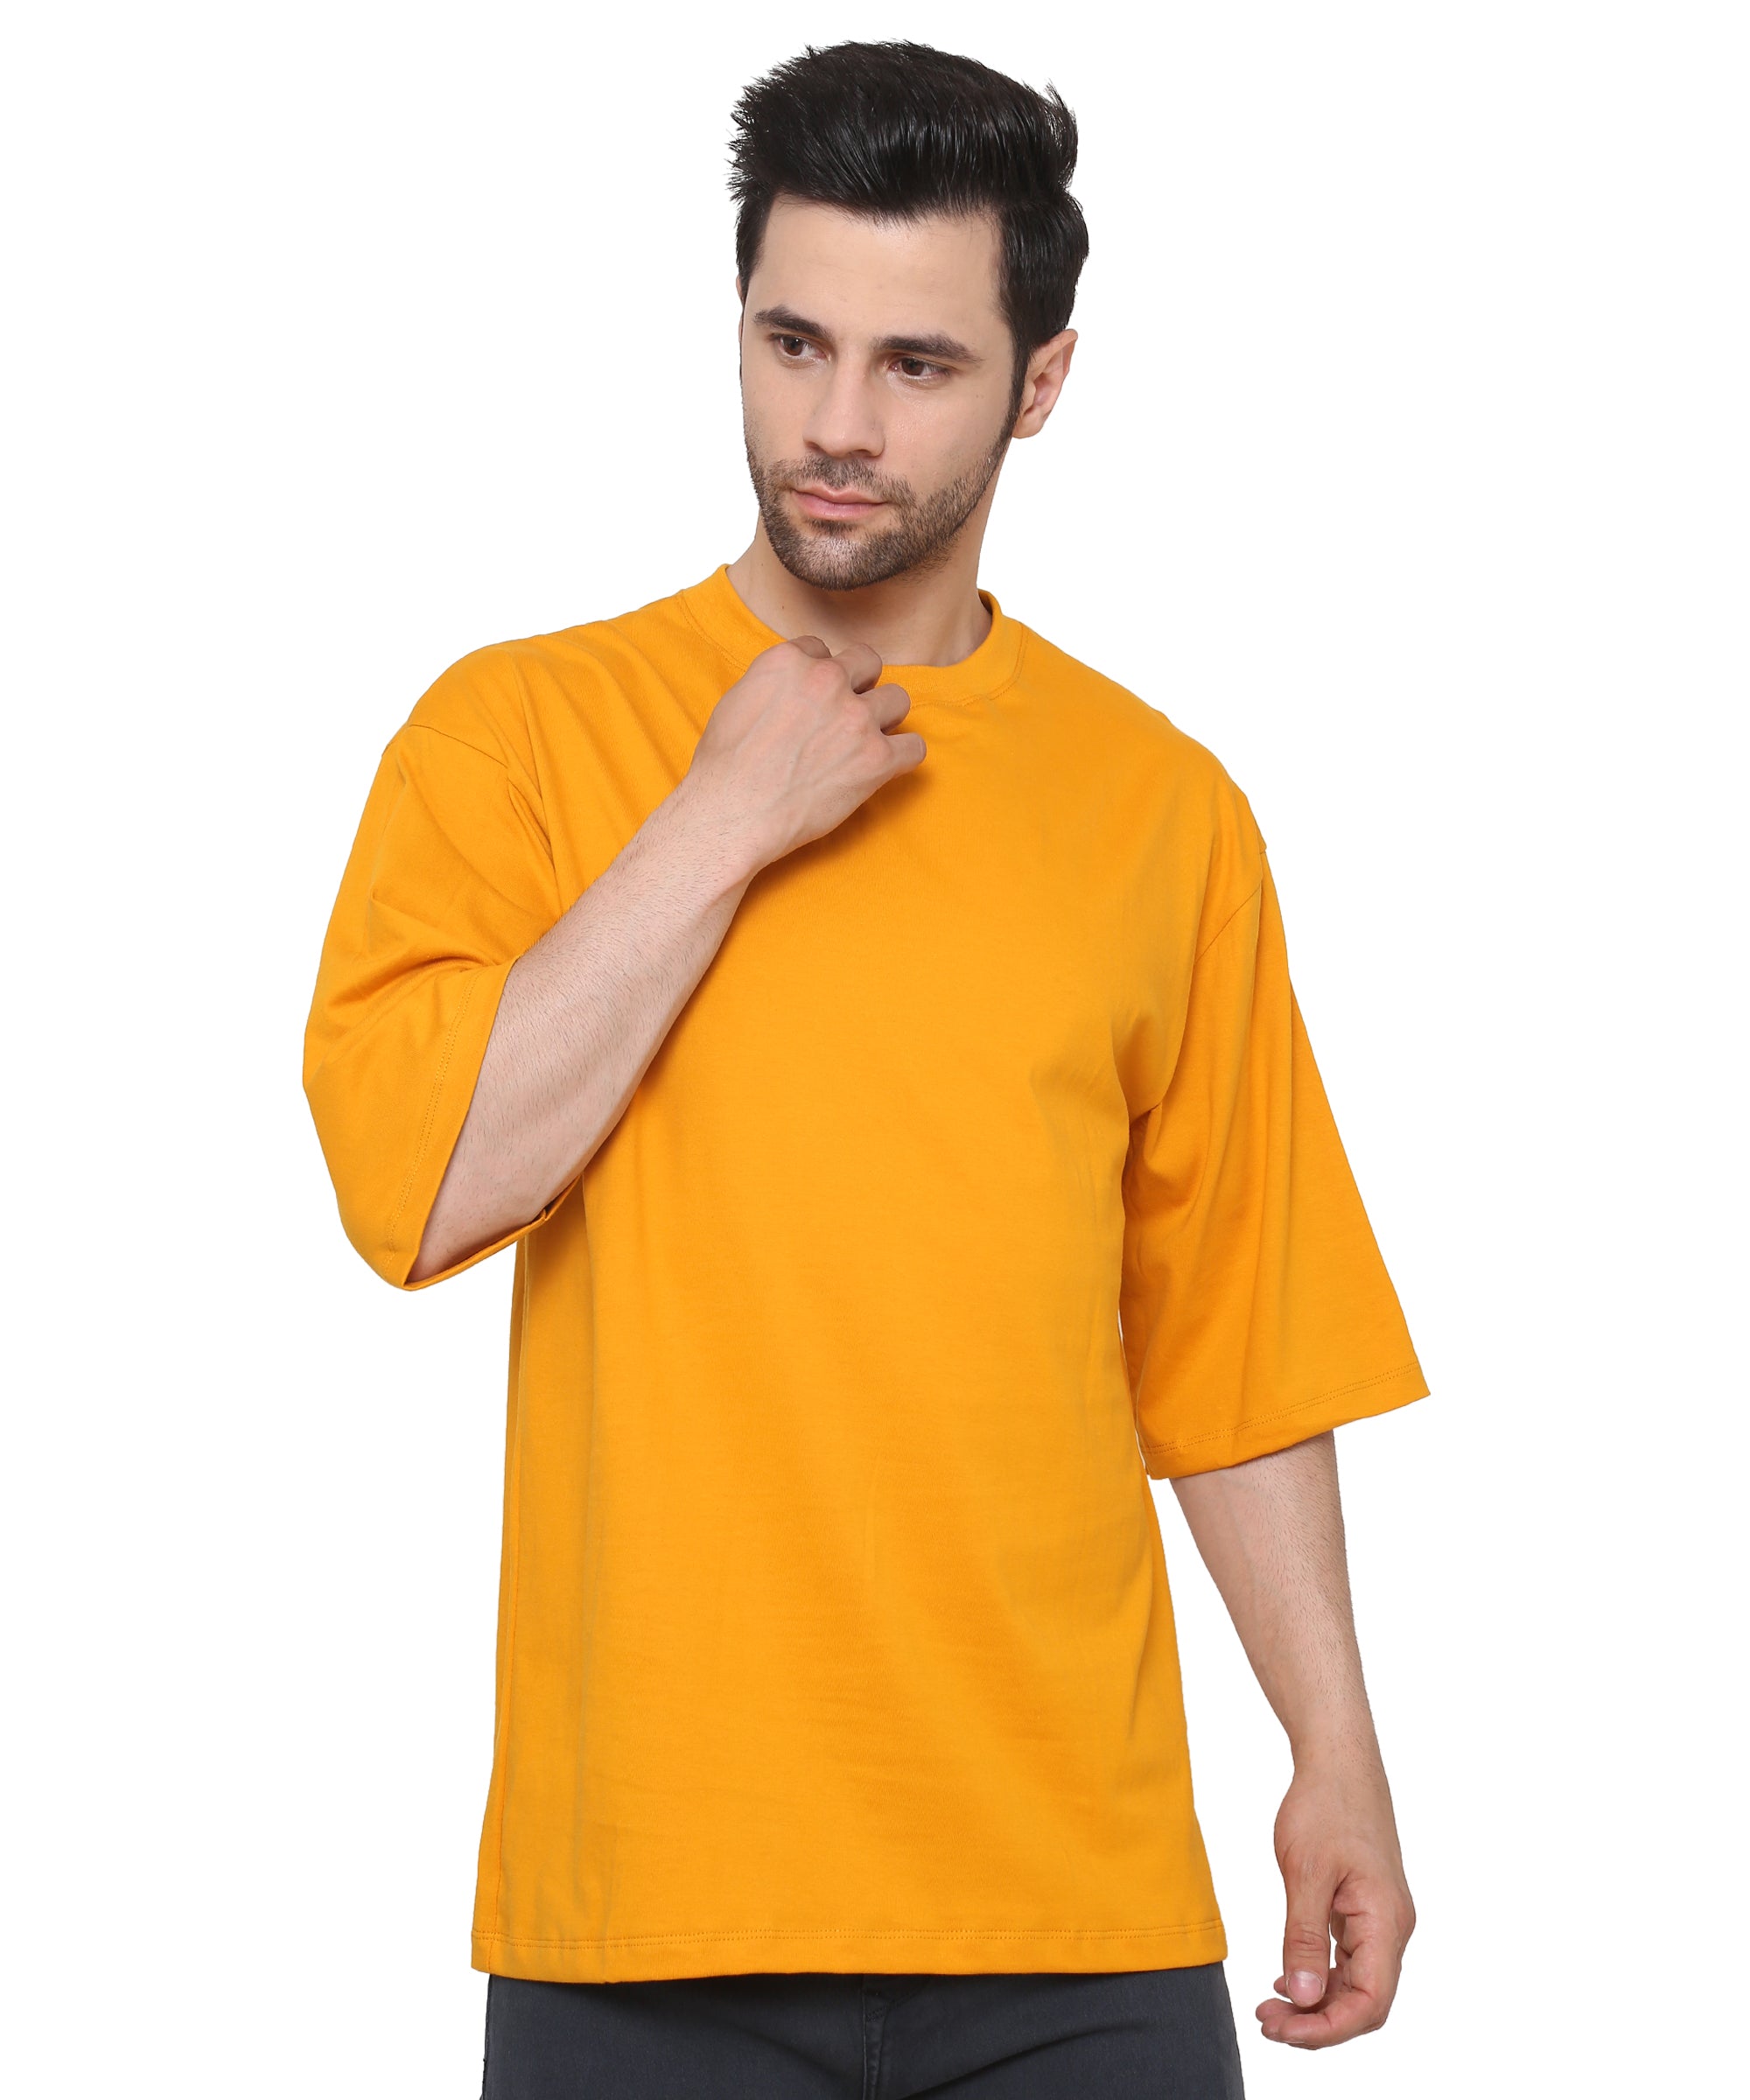 Sunshade Oversized Cotton T-shirts Relaxed Fit Tees for Men